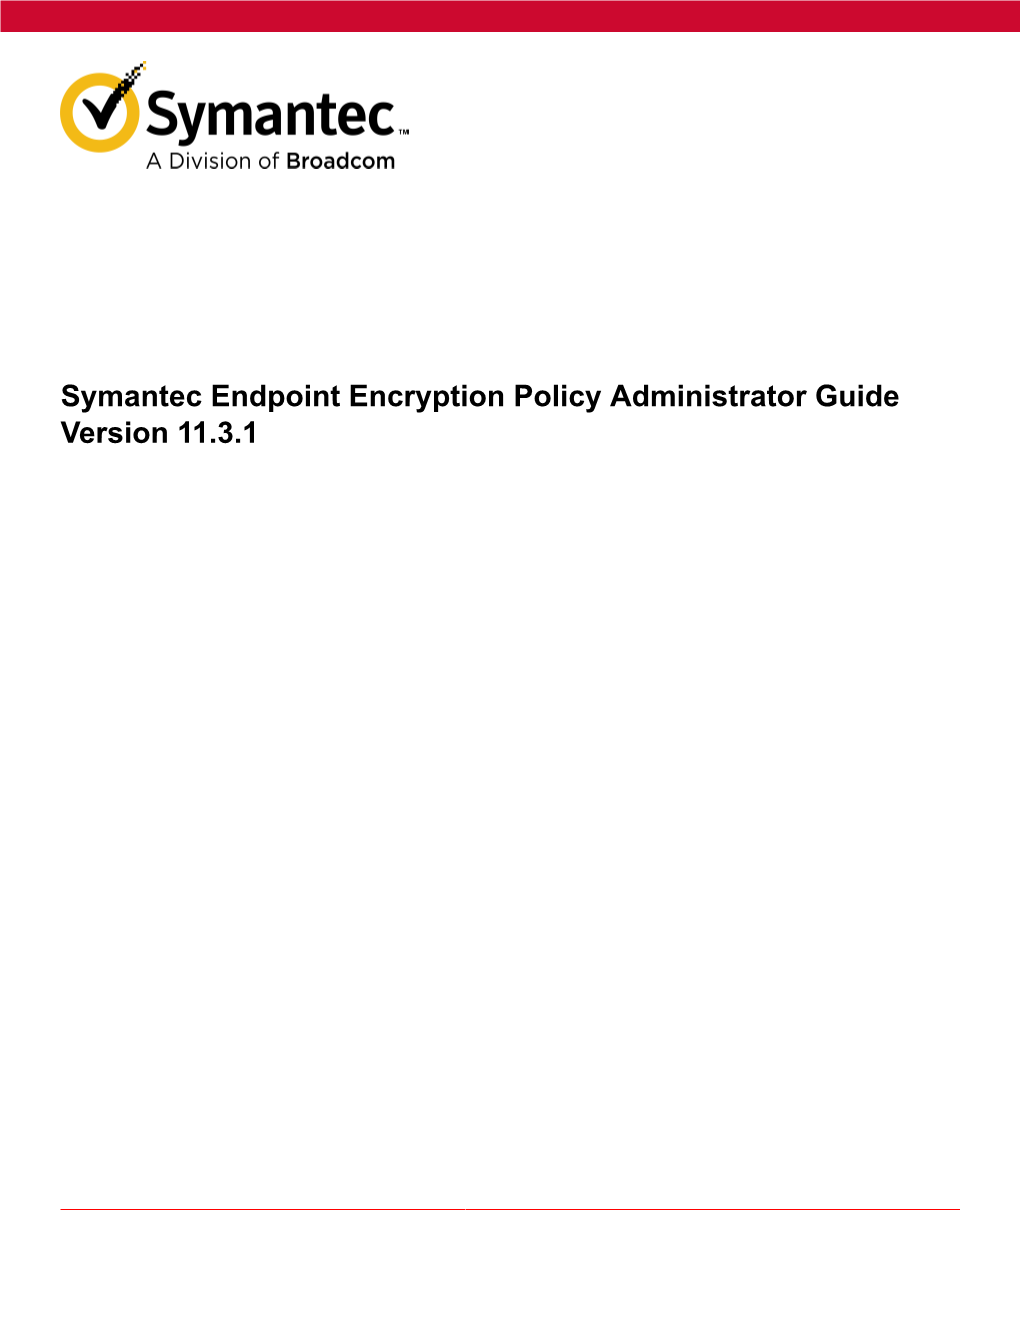 Symantec Endpoint Encryption Policy Administrator Guide Version 11.3.1